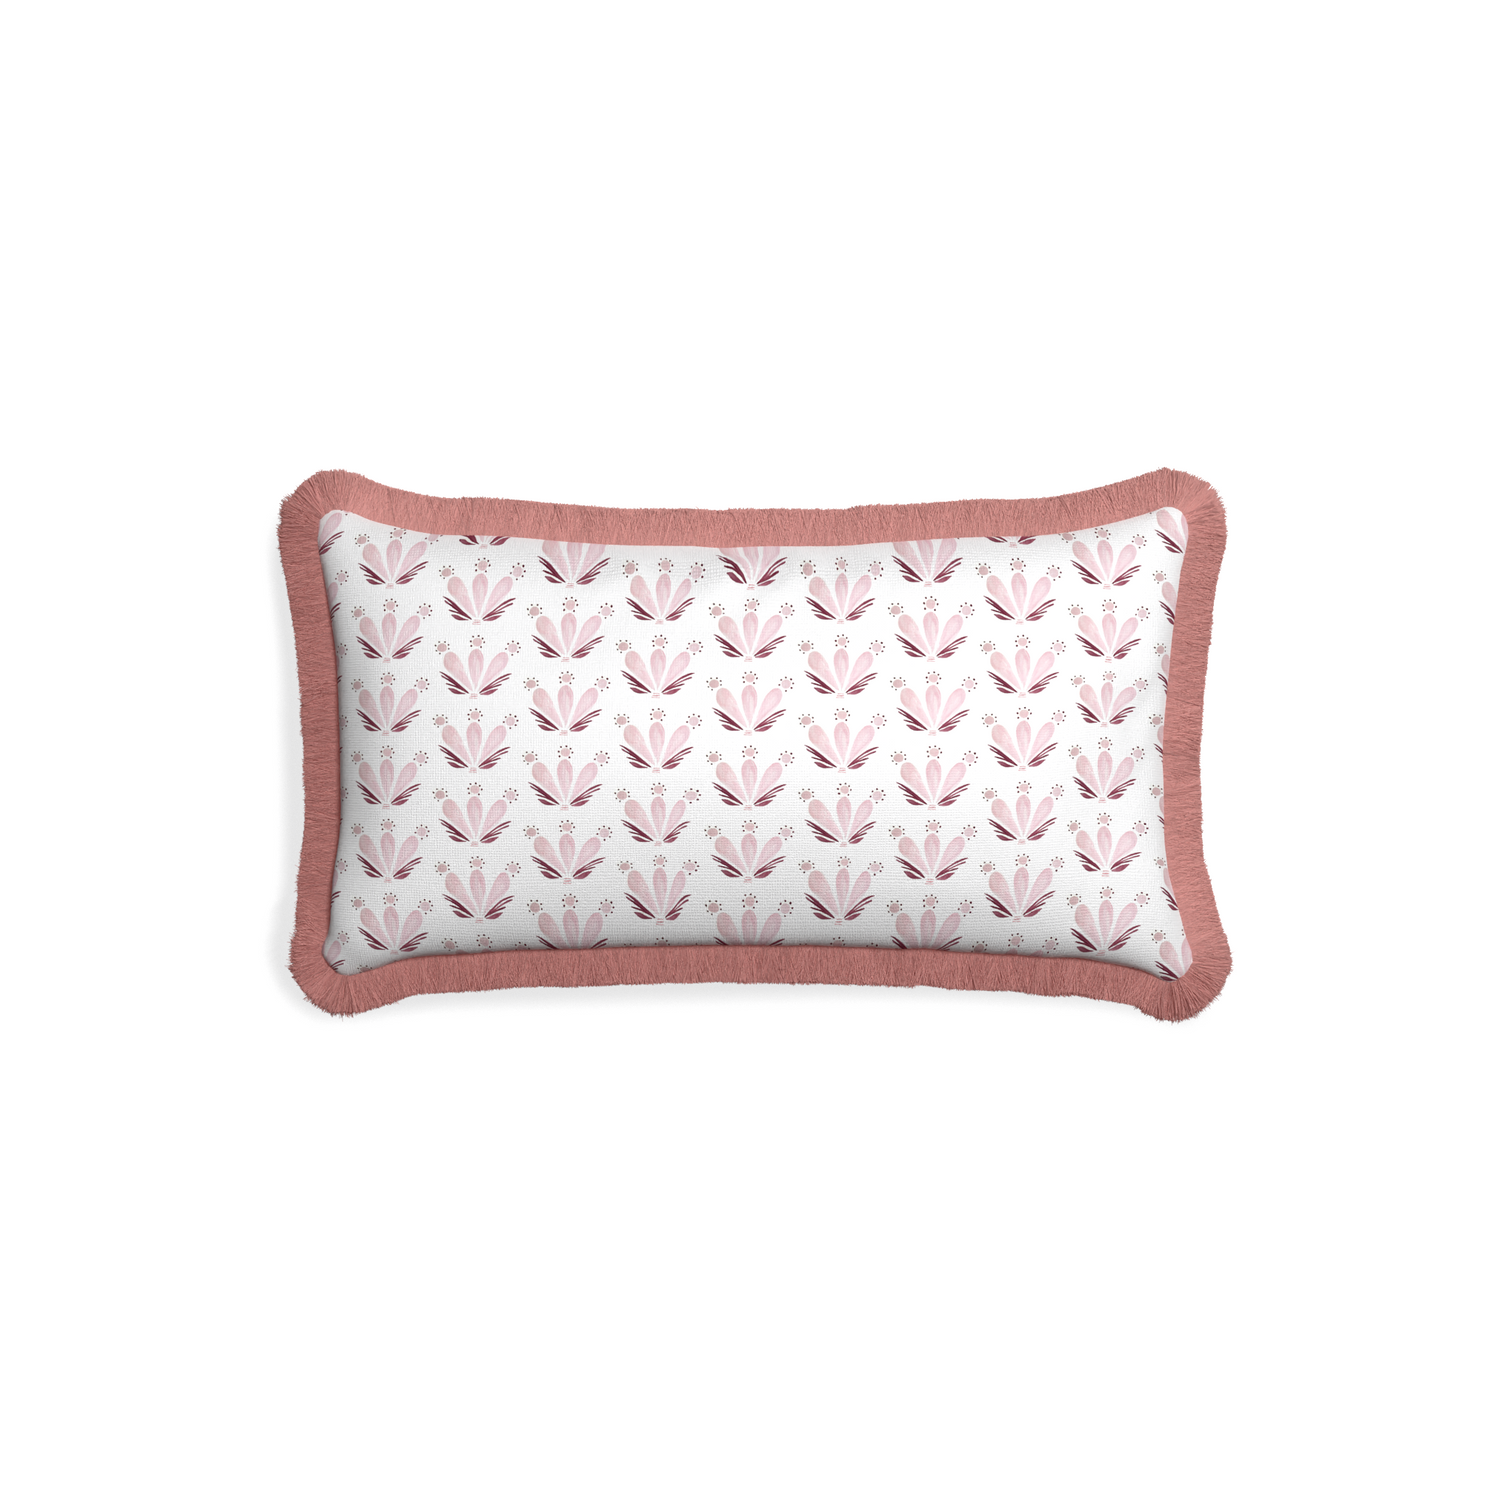 Petite-lumbar serena pink custom pink & burgundy drop repeat floralpillow with d fringe on white background